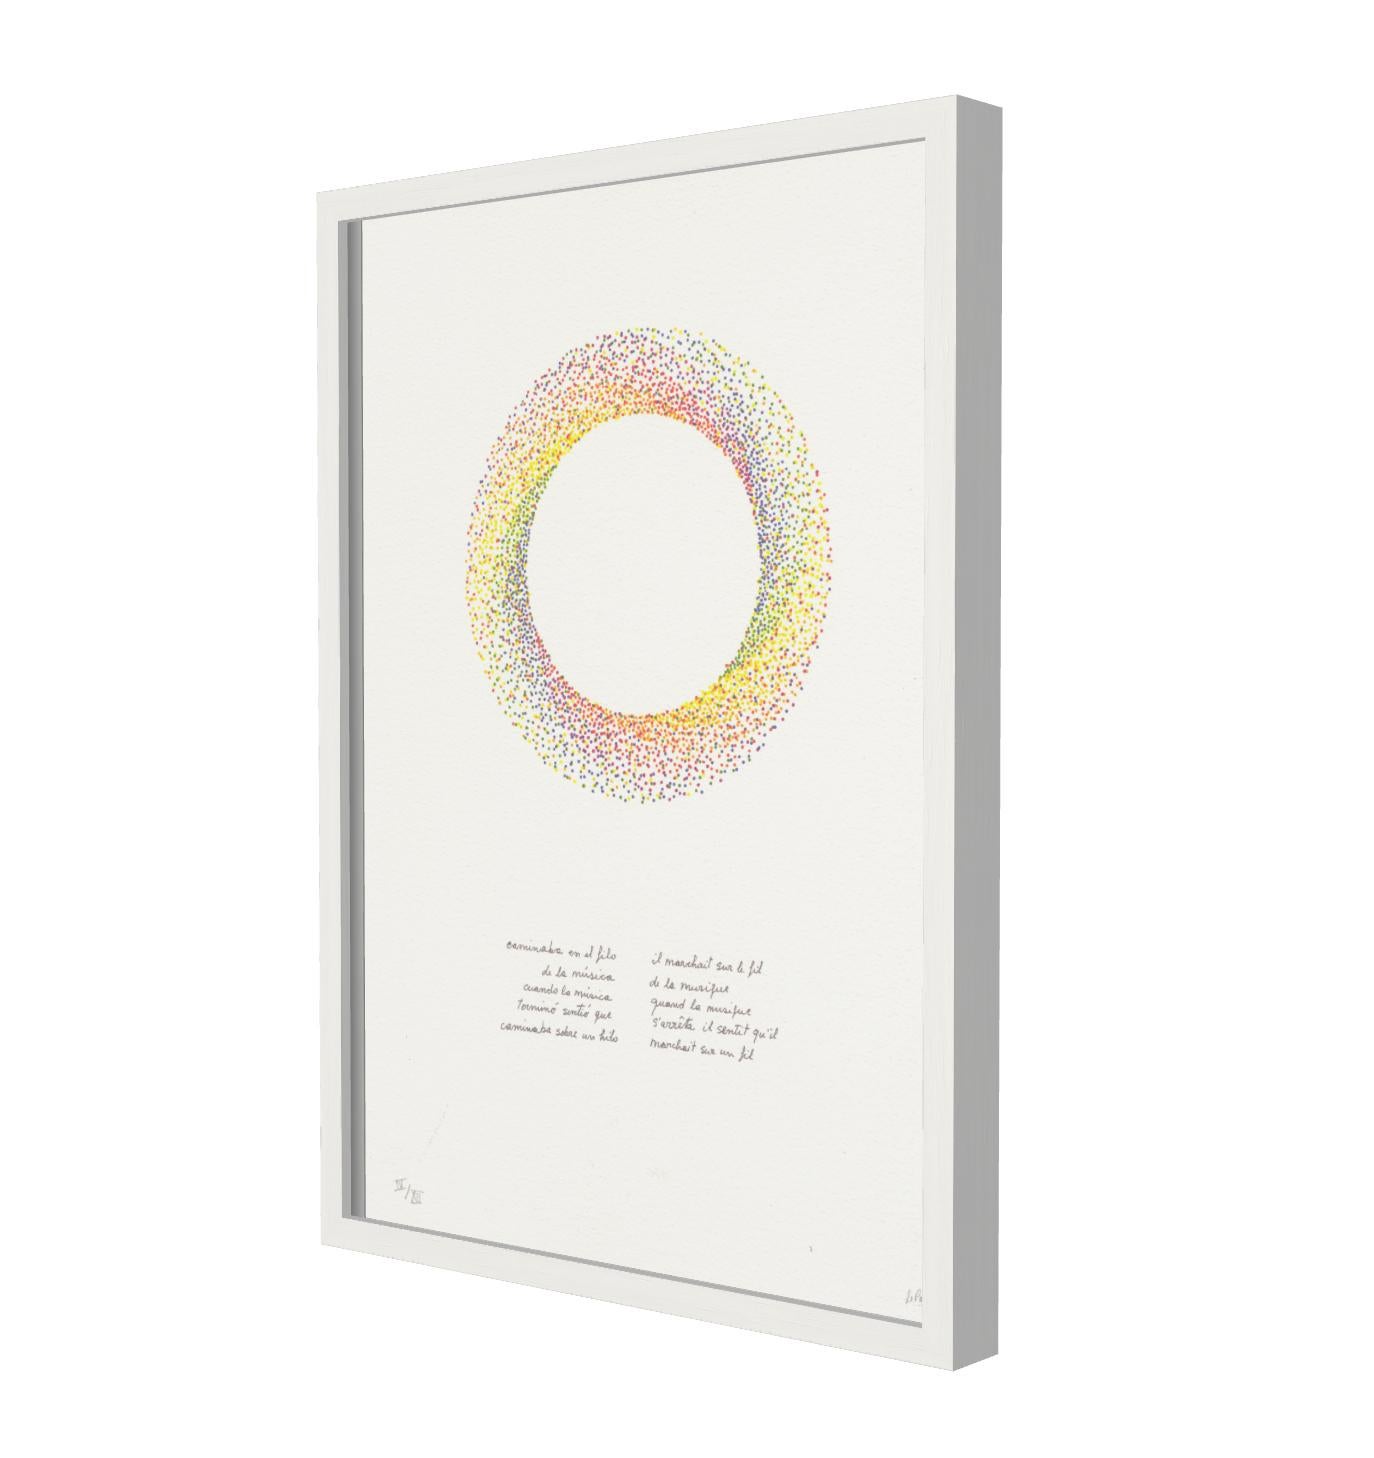 ALCHIMIE & POESIE - White Abstract Print by Julio Le Parc